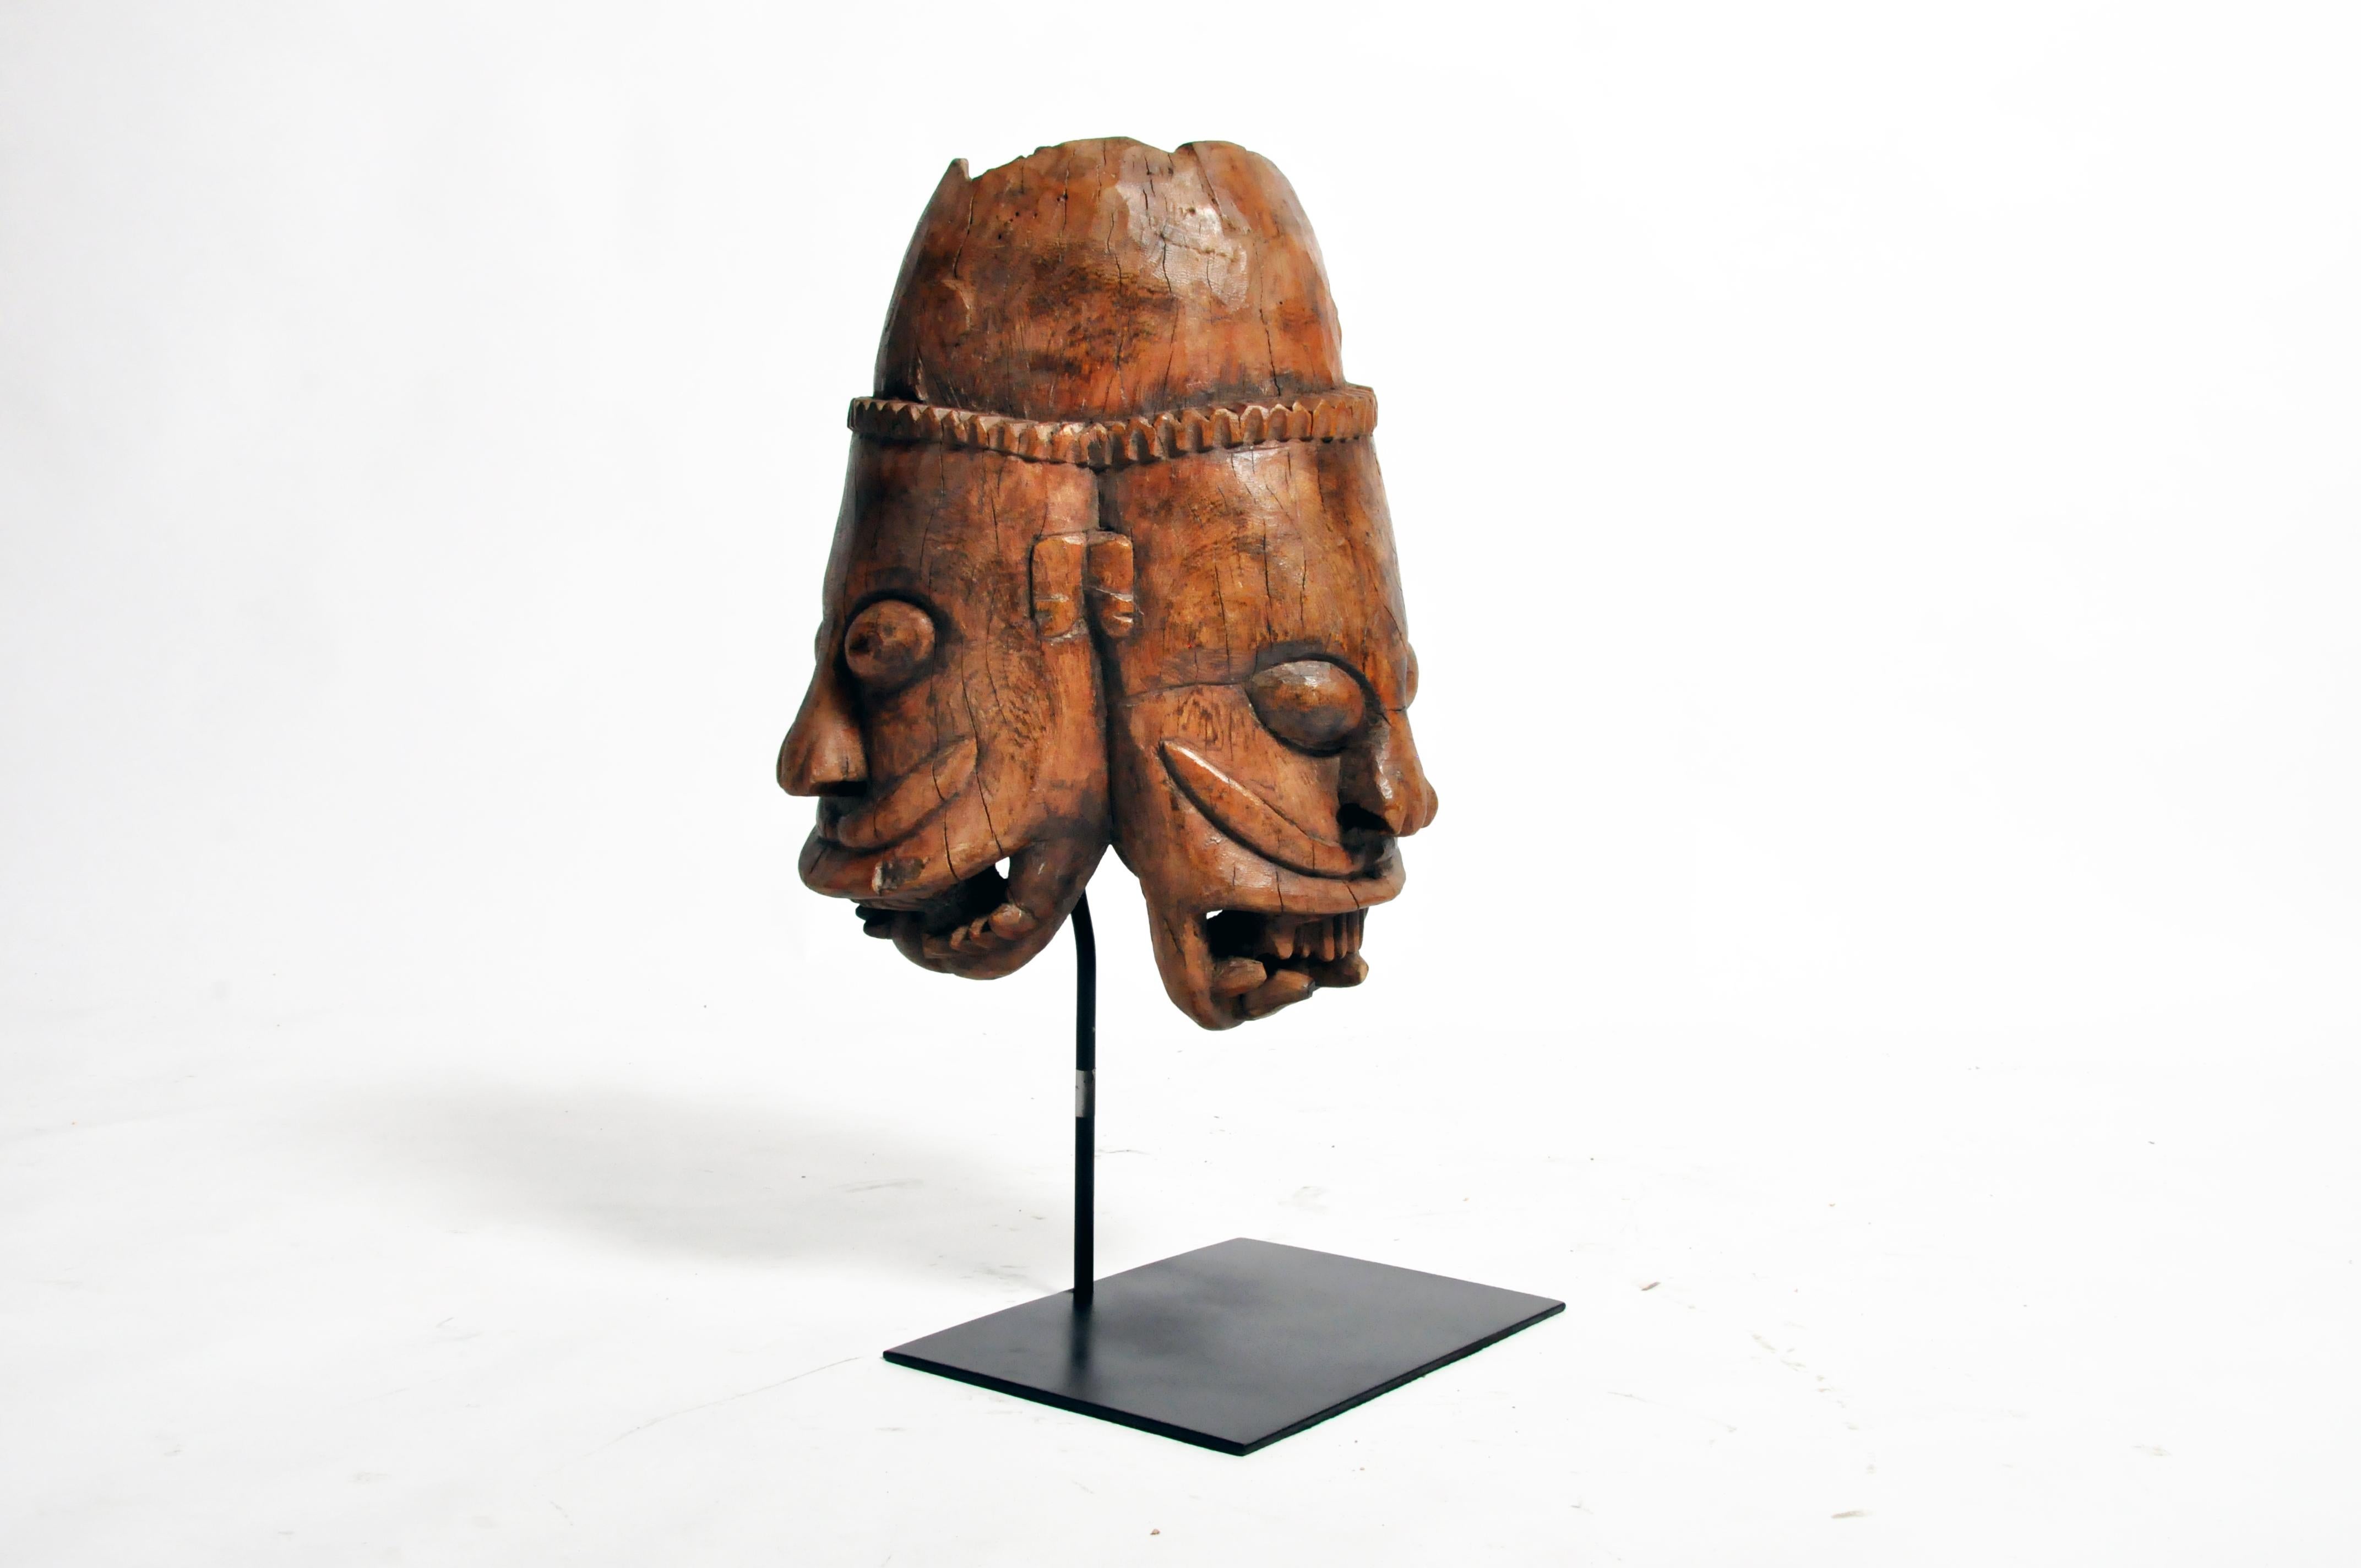 Poly-chrome wooden mask from Rajasthan, India, made from Sheesham wood, circa 20th century. The mask features a grotesque smile that is designed to ward off the evil eye. According to traditional beliefs, a beautiful mask would only lure envy and